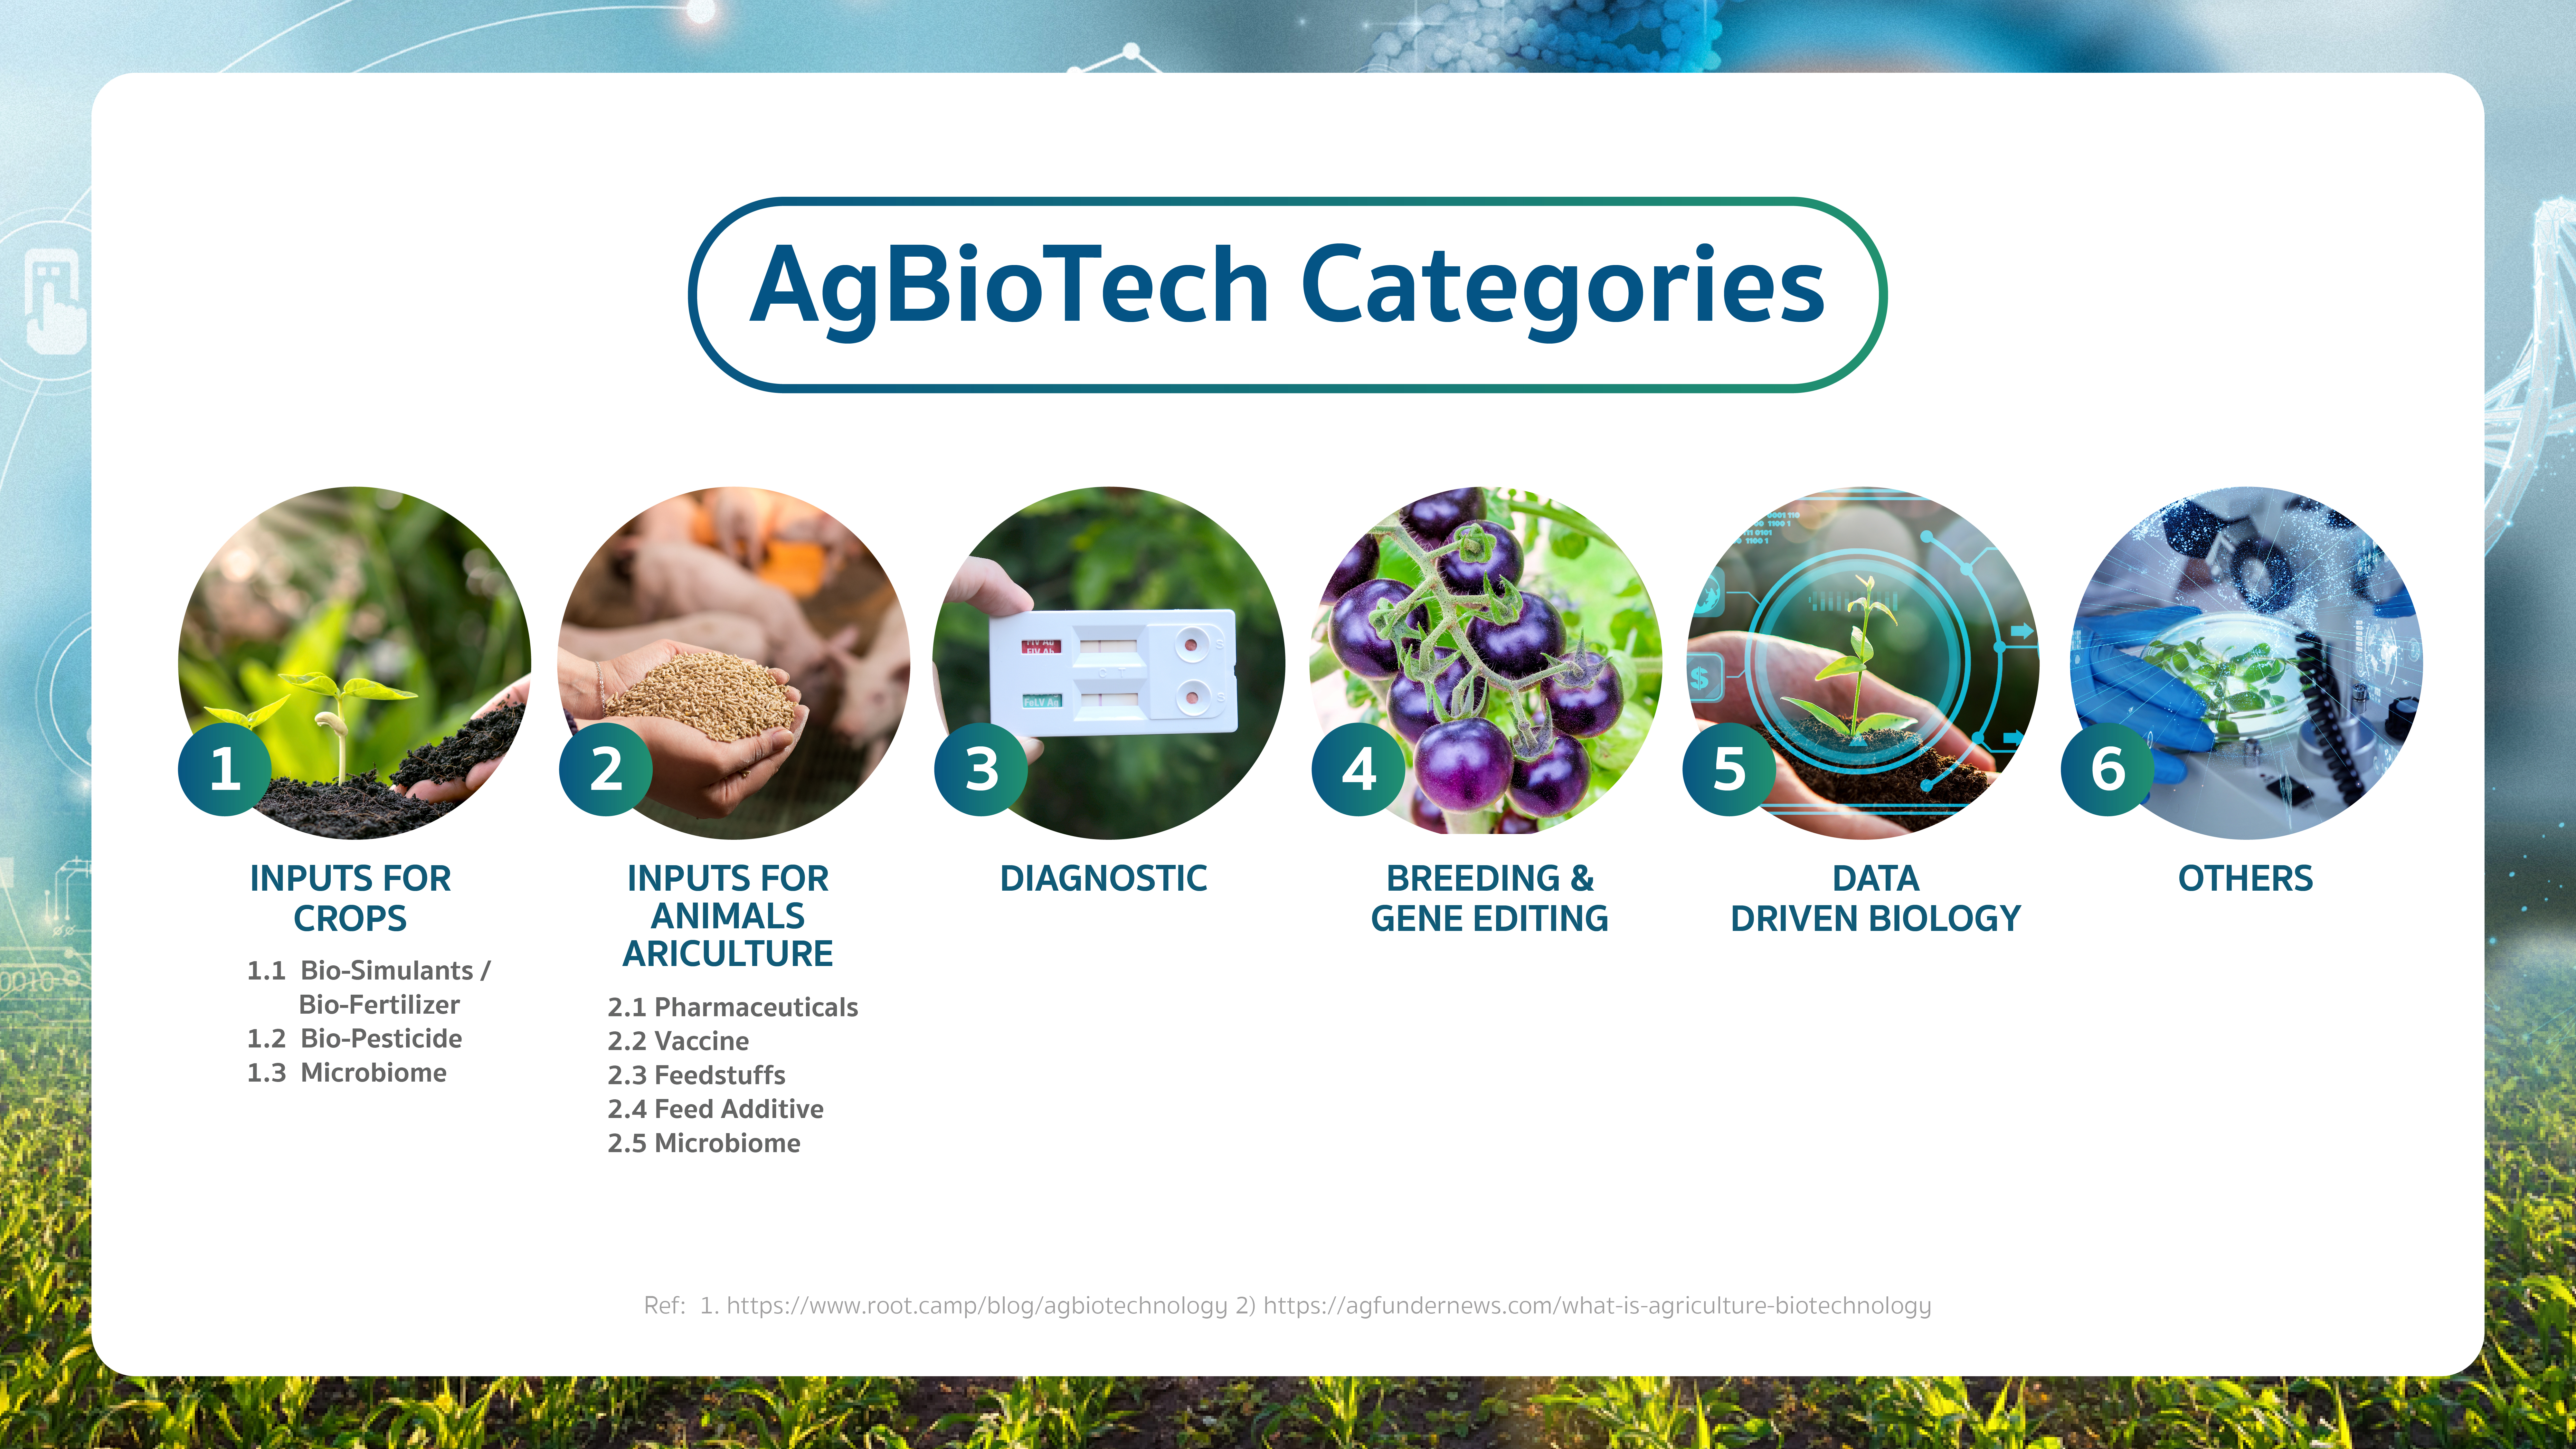 AgBioTech Categories